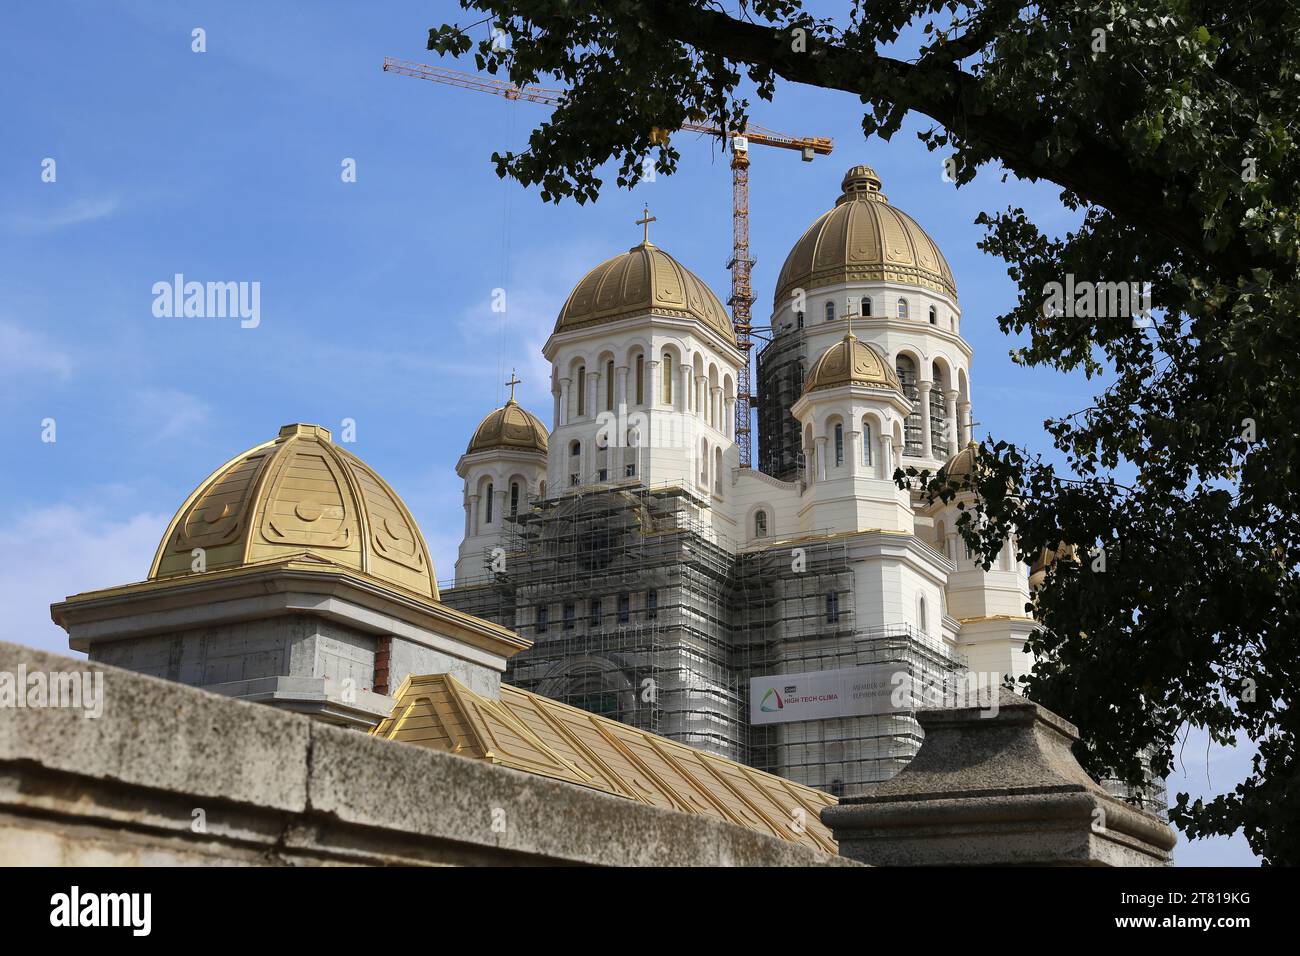 Orthodox Cathedral of National Salvation (Catedrala Mantuirii Neamului) under construction, Cotroceni, Historic Centre, Bucharest,Romania, Europe Stock Photo